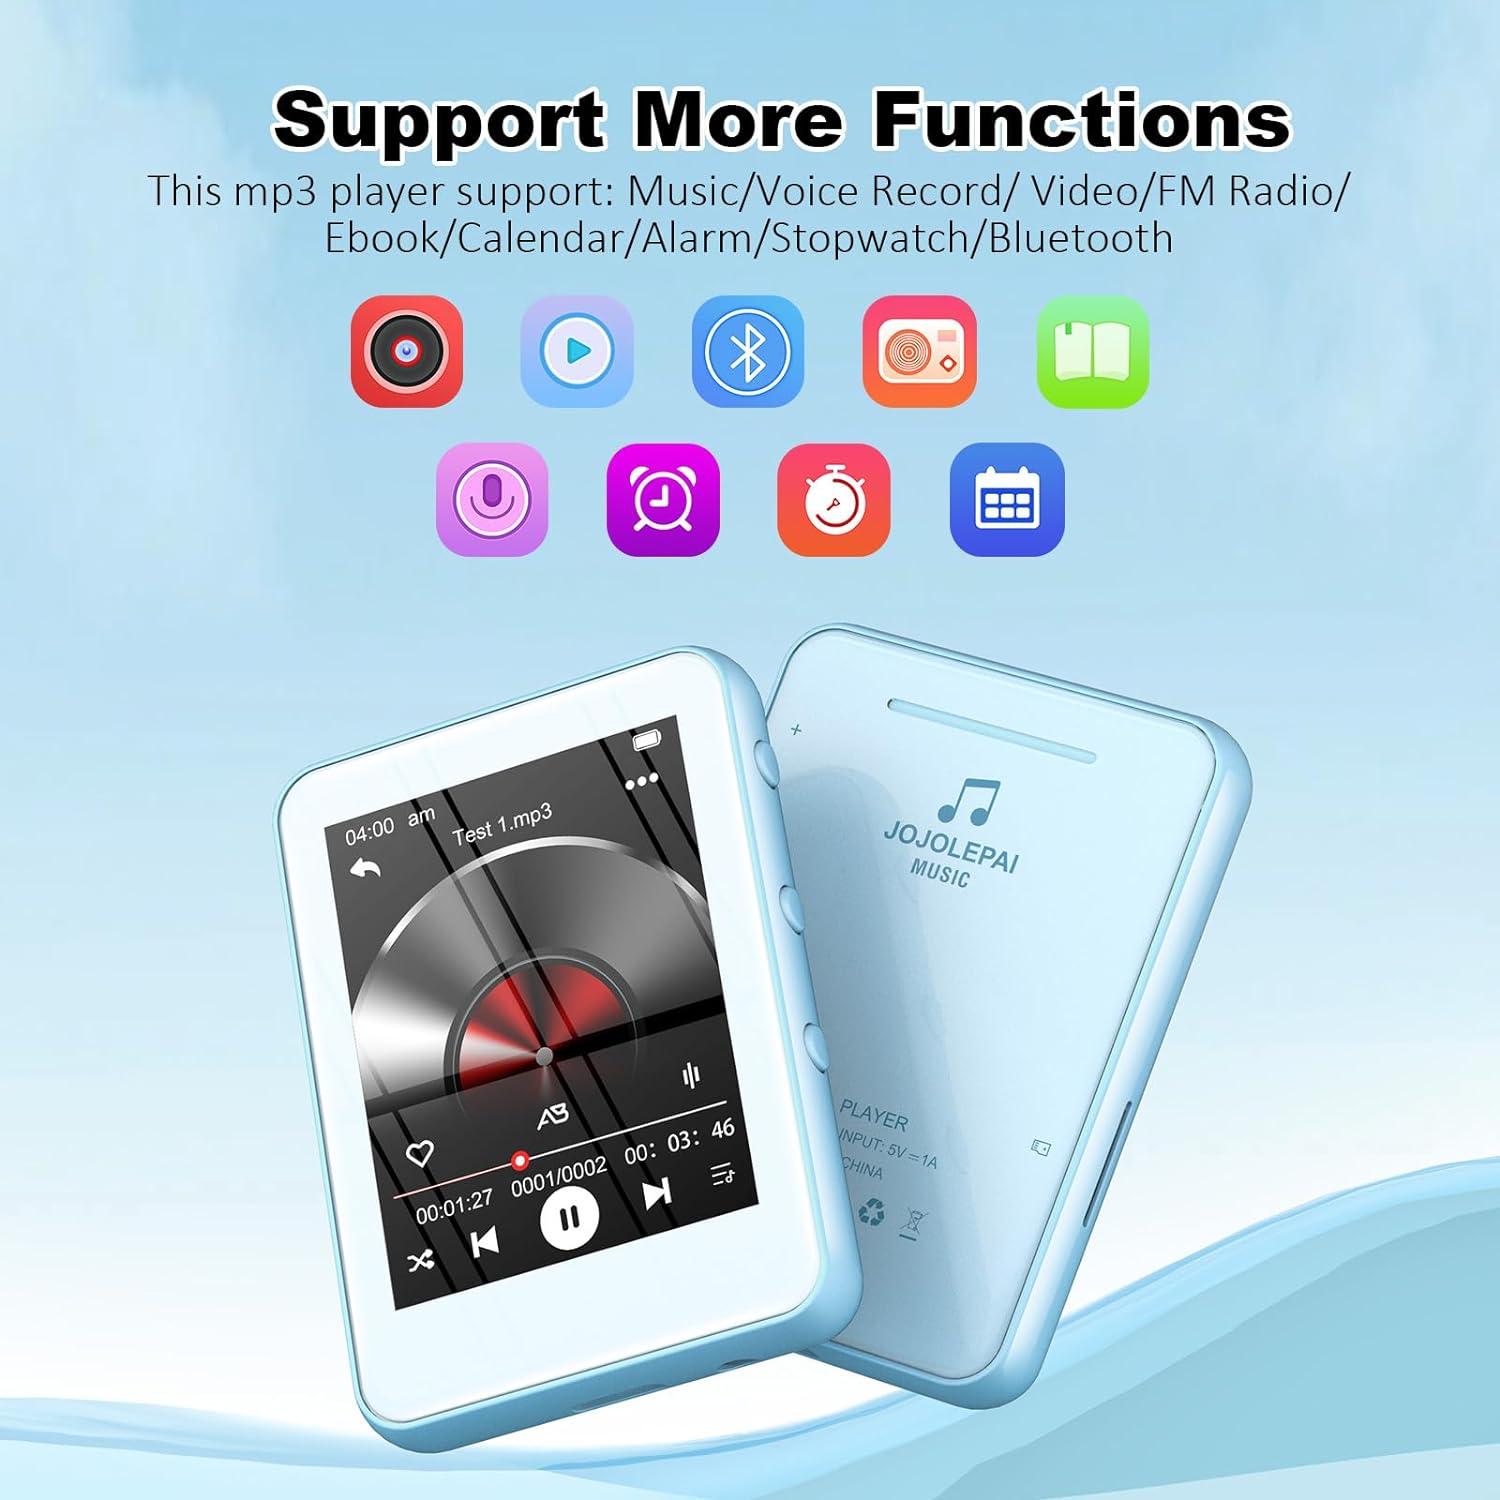 32GB Mp3 Player with Bluetooth 5.0,Play Music up to 30 Hrs.Portable Digital  Lossless Music MP3 MP4 Player with FM Radio, Voice Recorder, Super Light